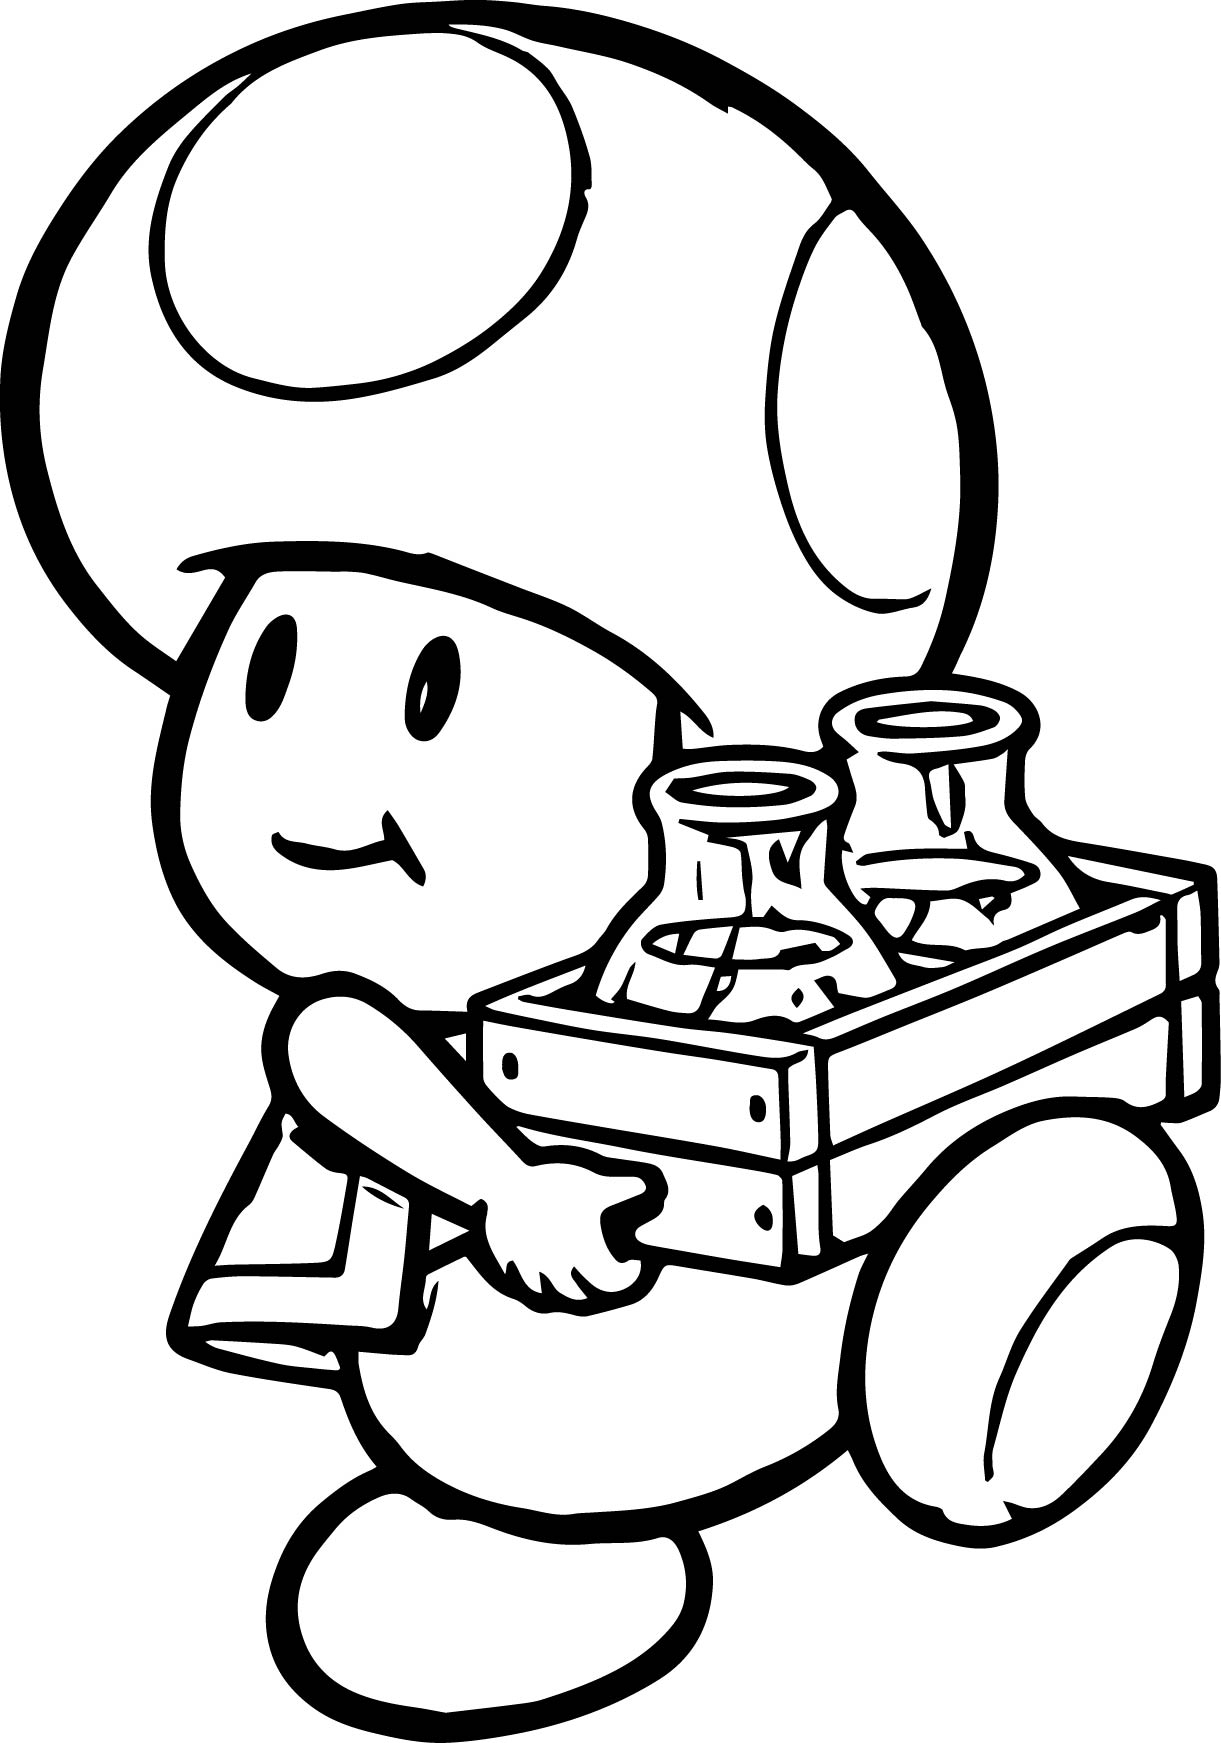 mario characters coloring pages coloring pages of mario characters coloring page mario pages characters coloring 